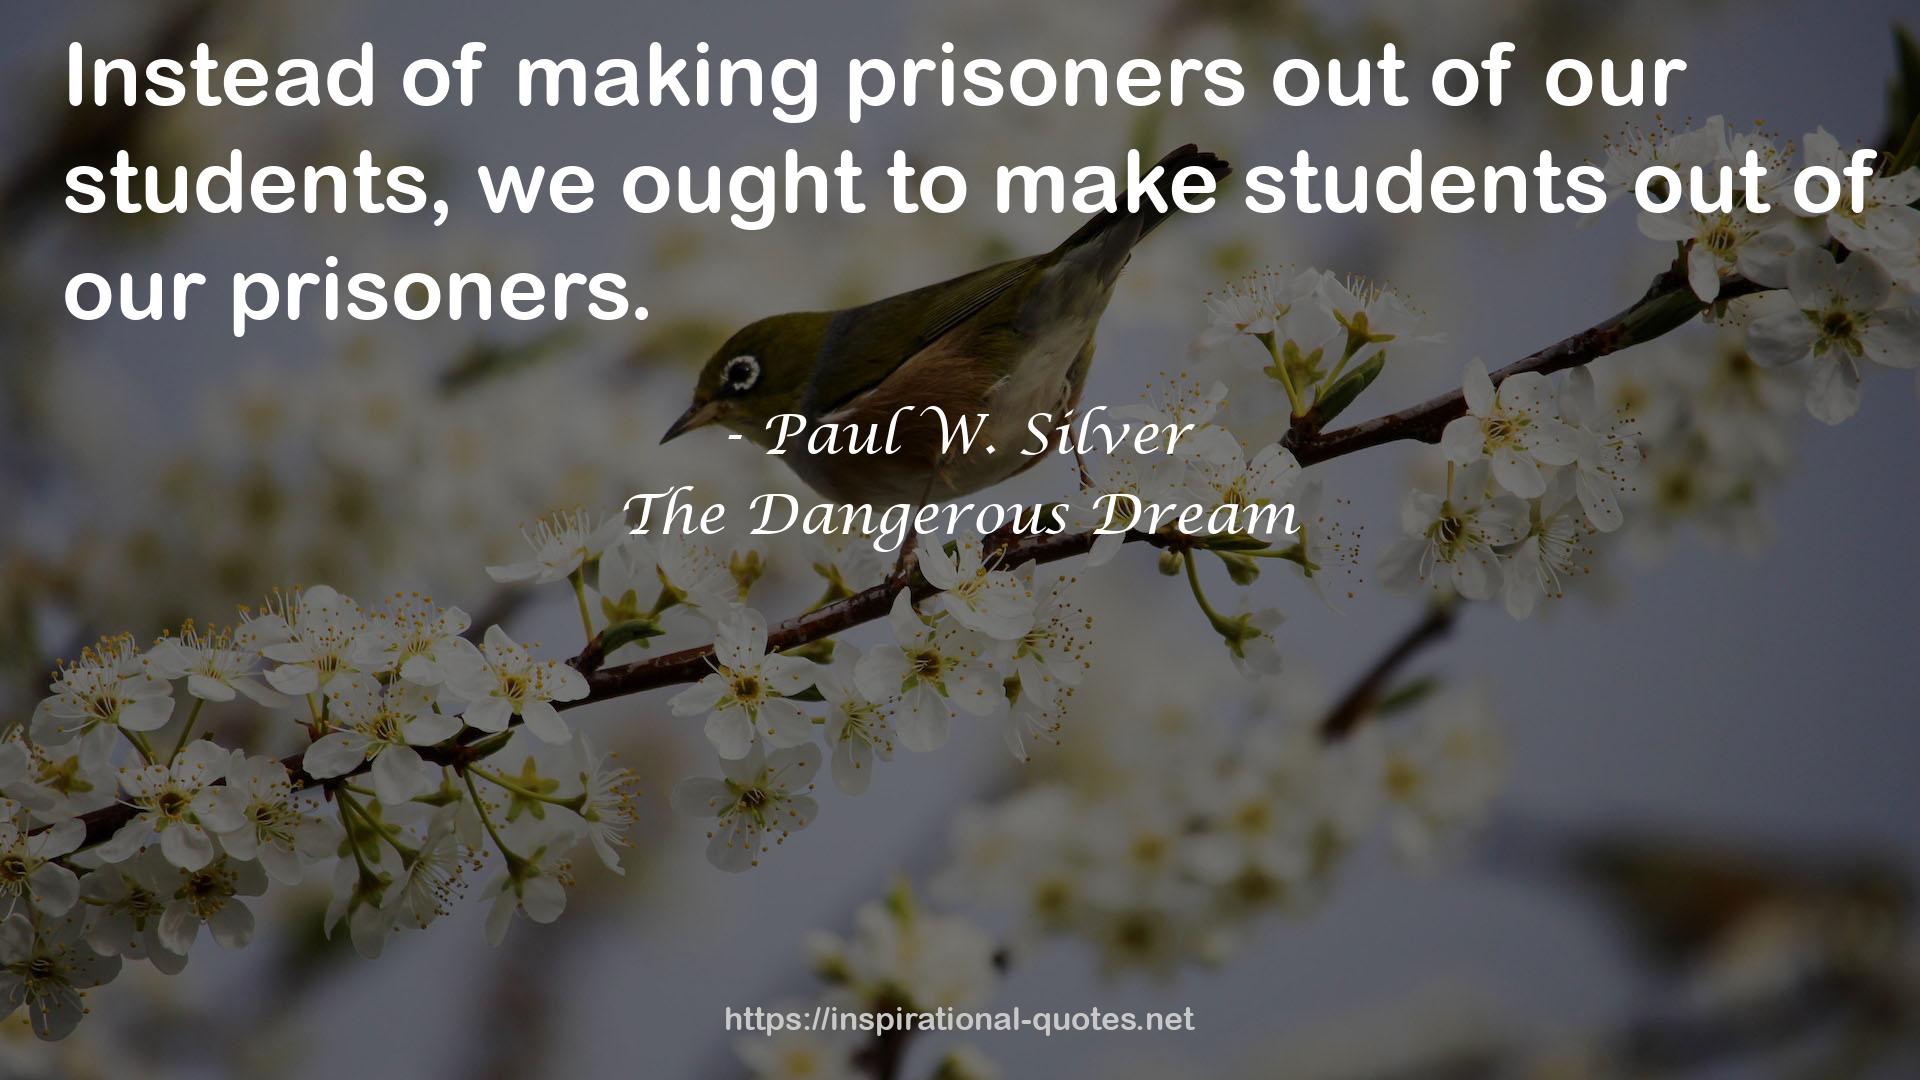 Paul W. Silver QUOTES